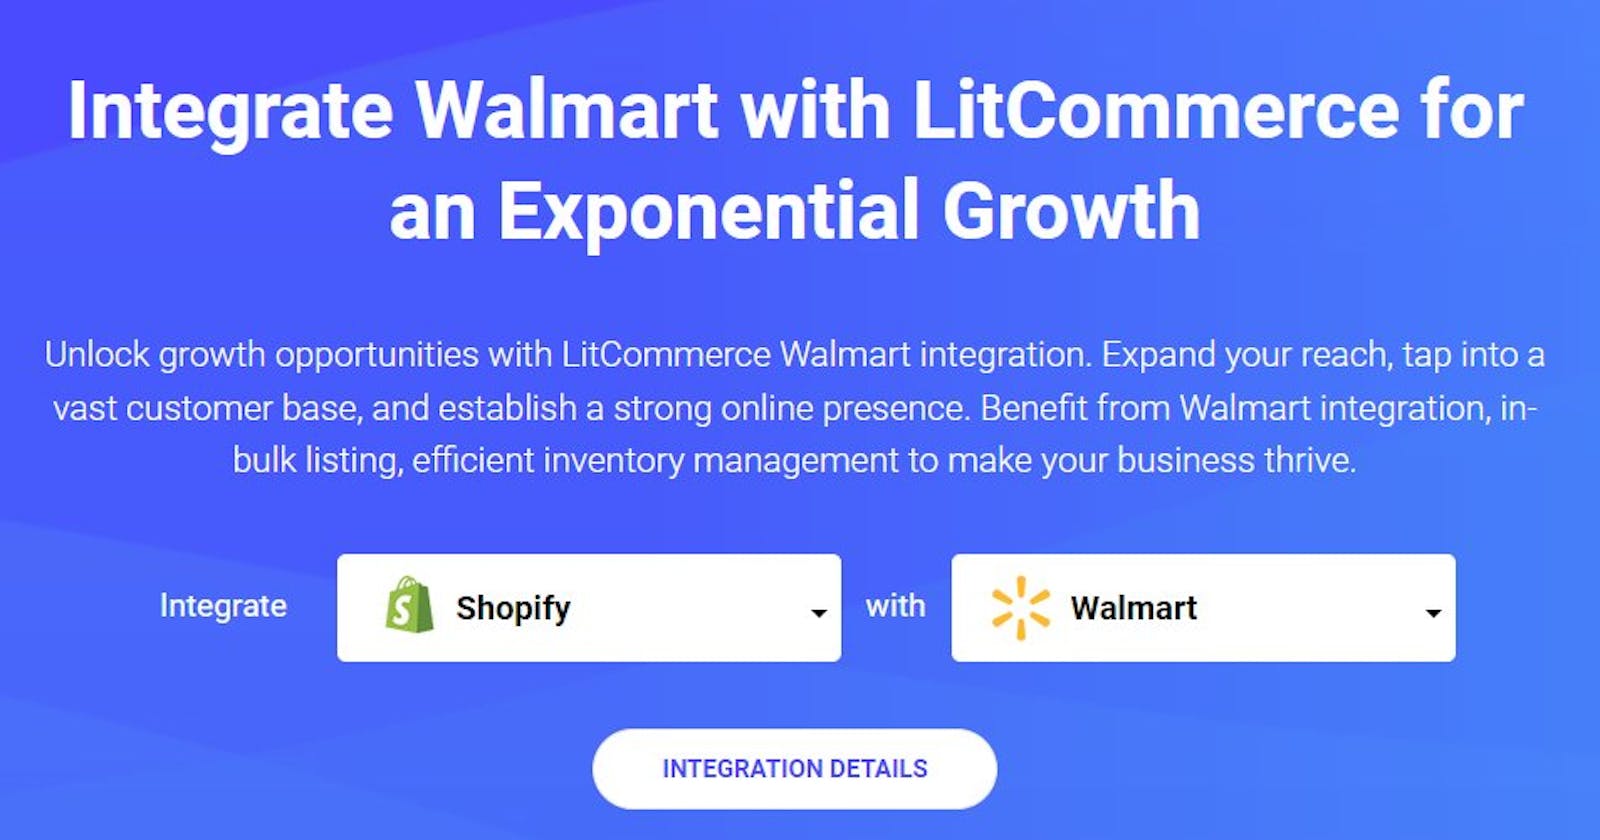 Integrate with Walmart? Should or Not?